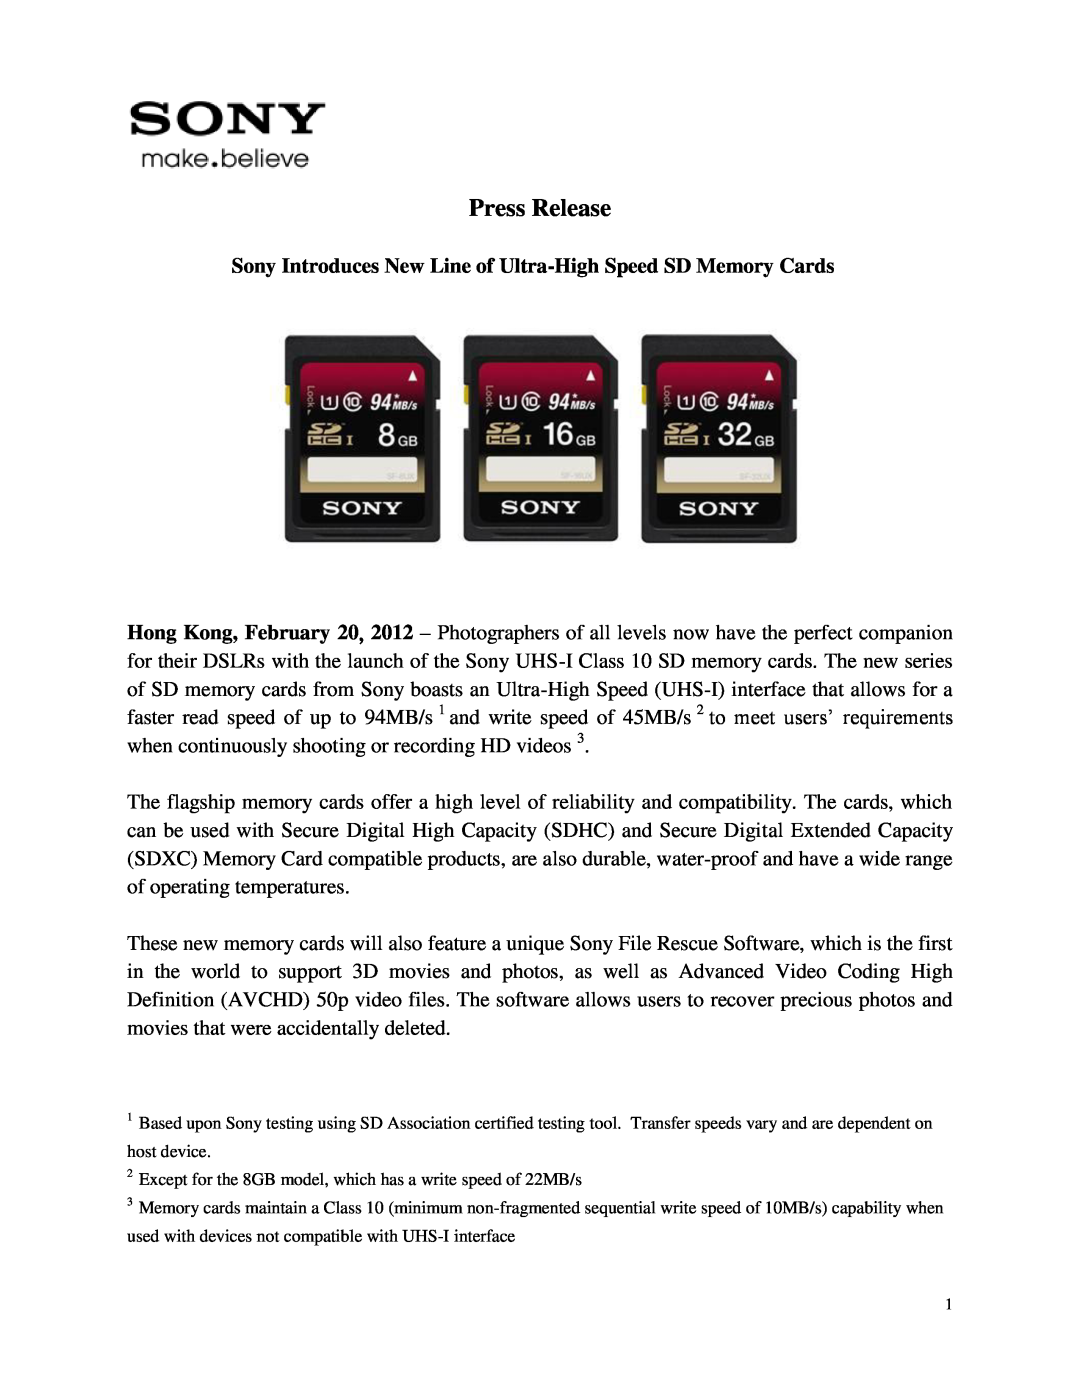 Sony SF16UX/TQ manual Sony Introduces New Line of Ultra-High Speed SD Memory Cards, Press Release 